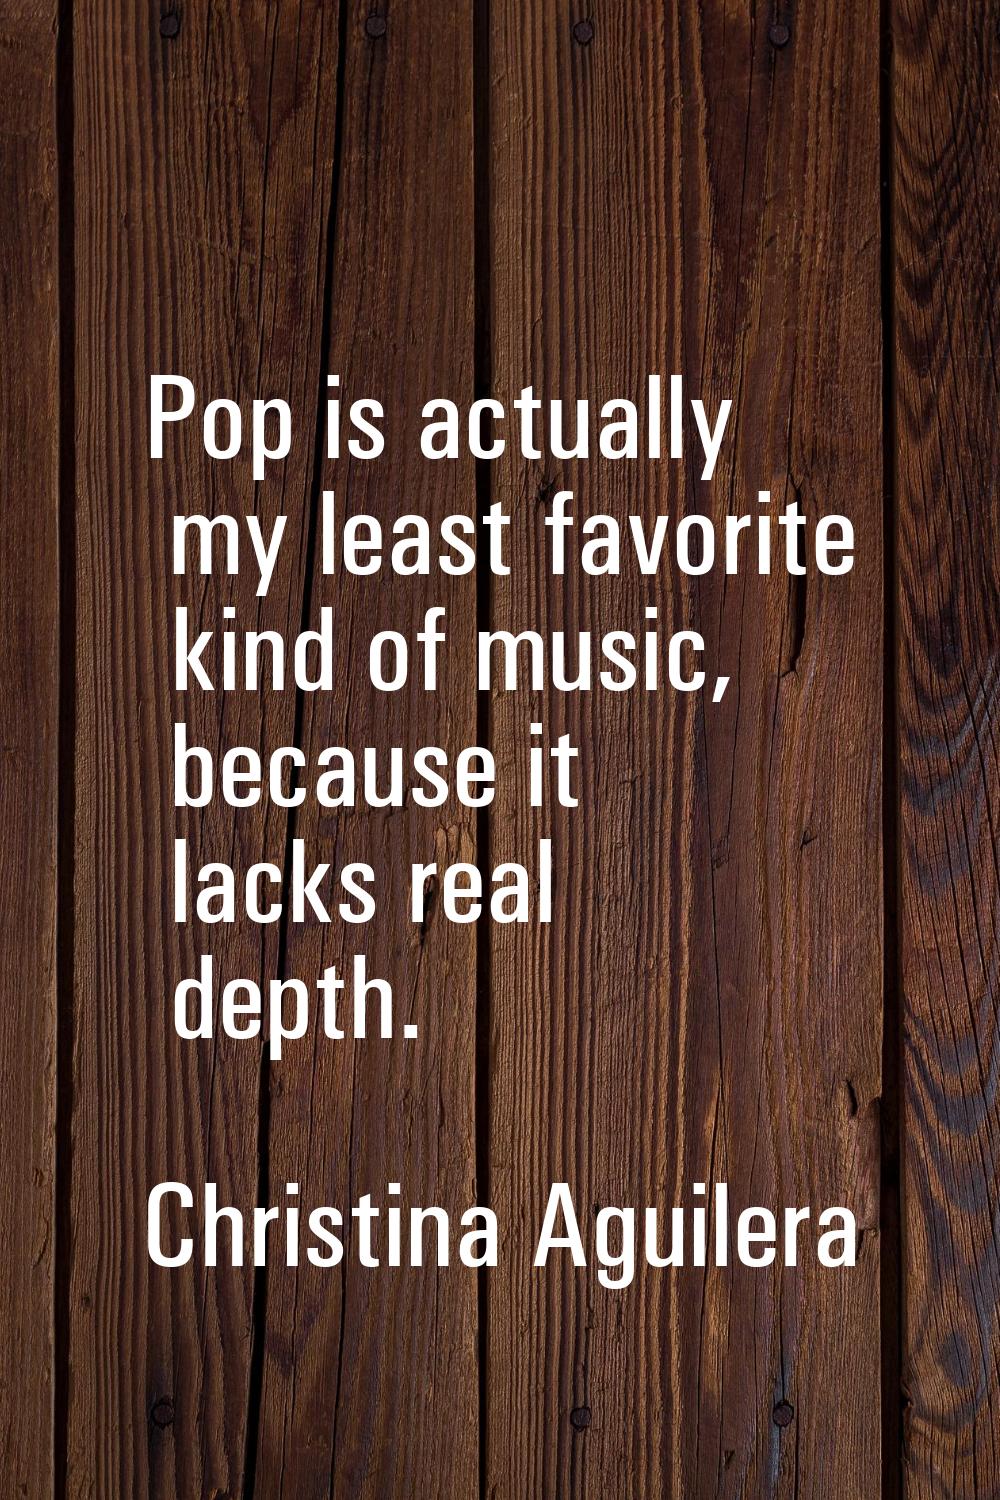 Pop is actually my least favorite kind of music, because it lacks real depth.